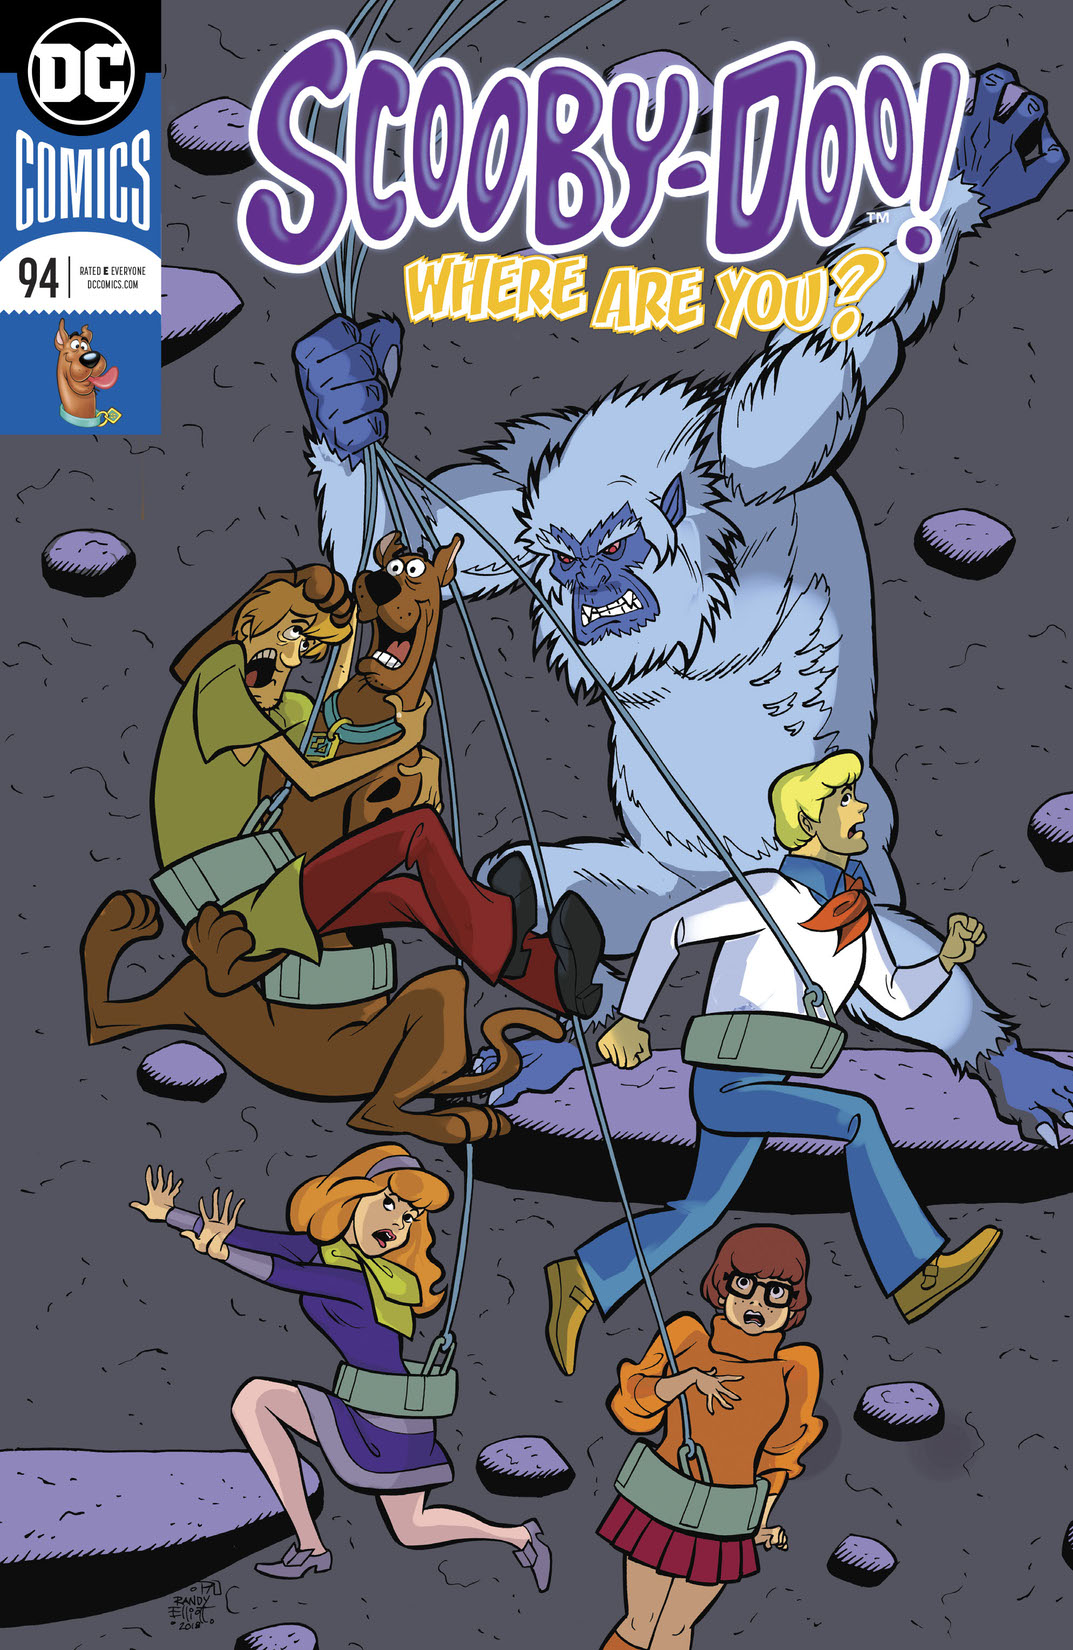 Scooby-Doo, Where Are You? #94 preview images